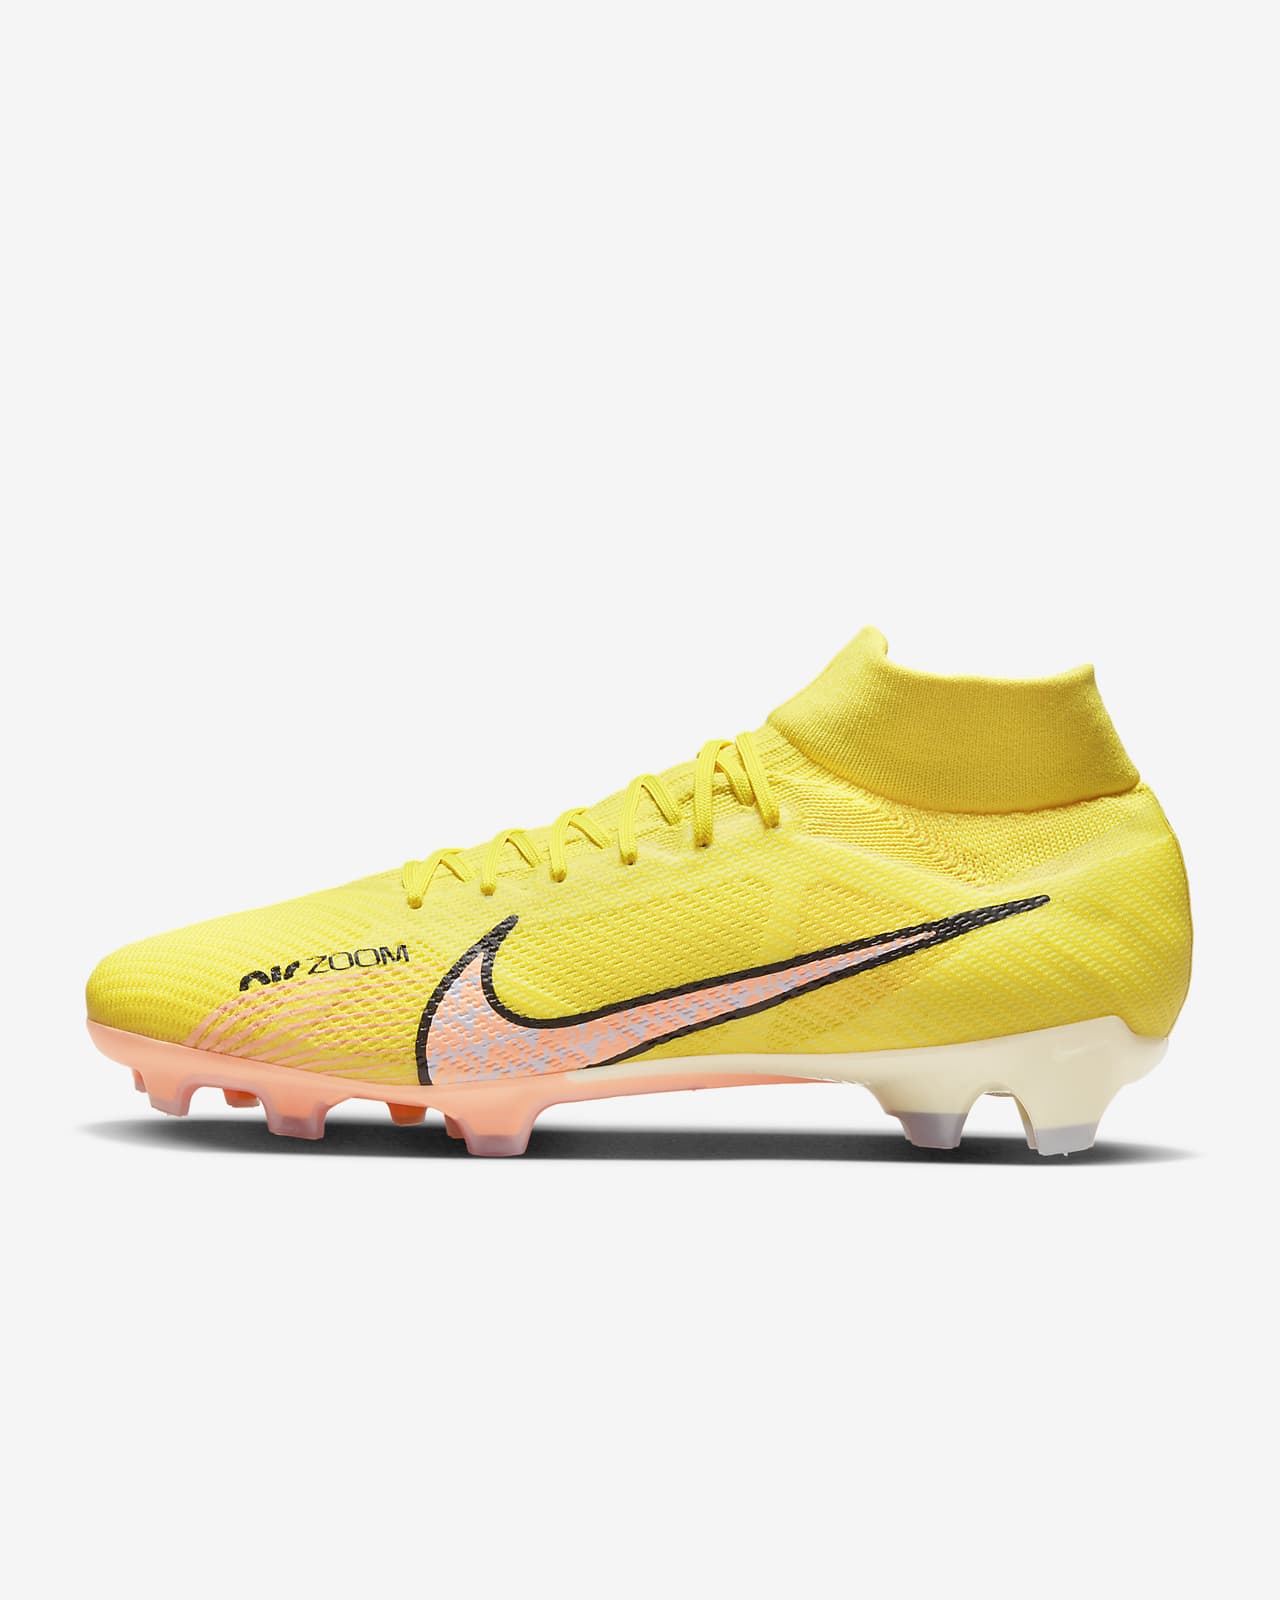 Nike Zoom Mercurial Superfly 9 Pro FG Firm-Ground Football Boot